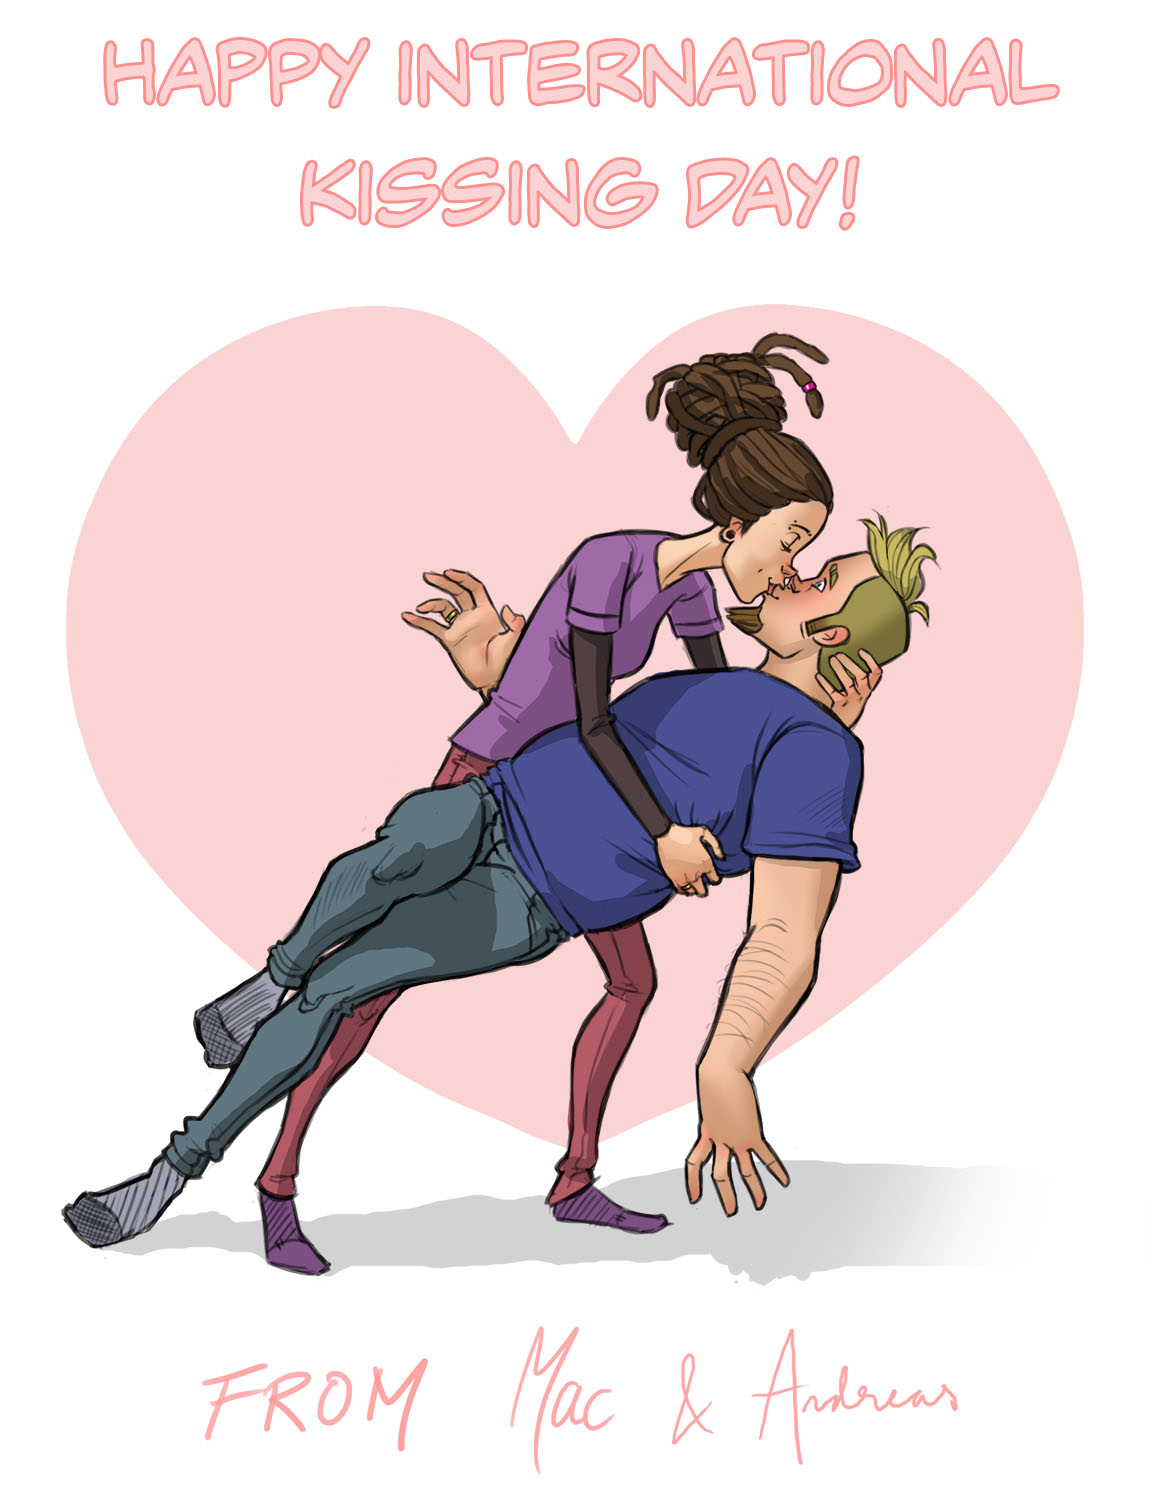 35 Happy International Kissing Day 2019 Pictures And Images